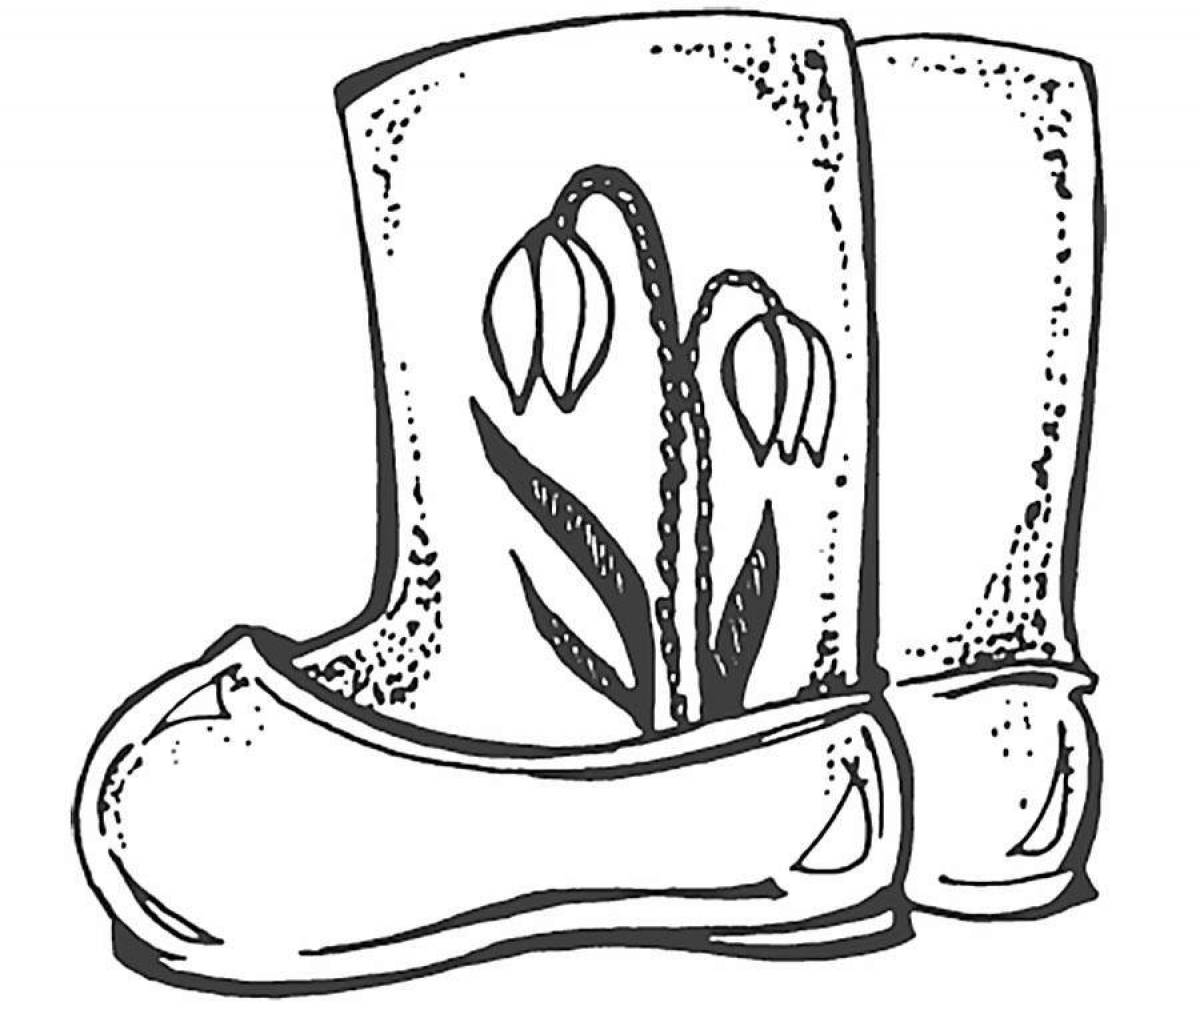 Joyful boots coloring book for kids